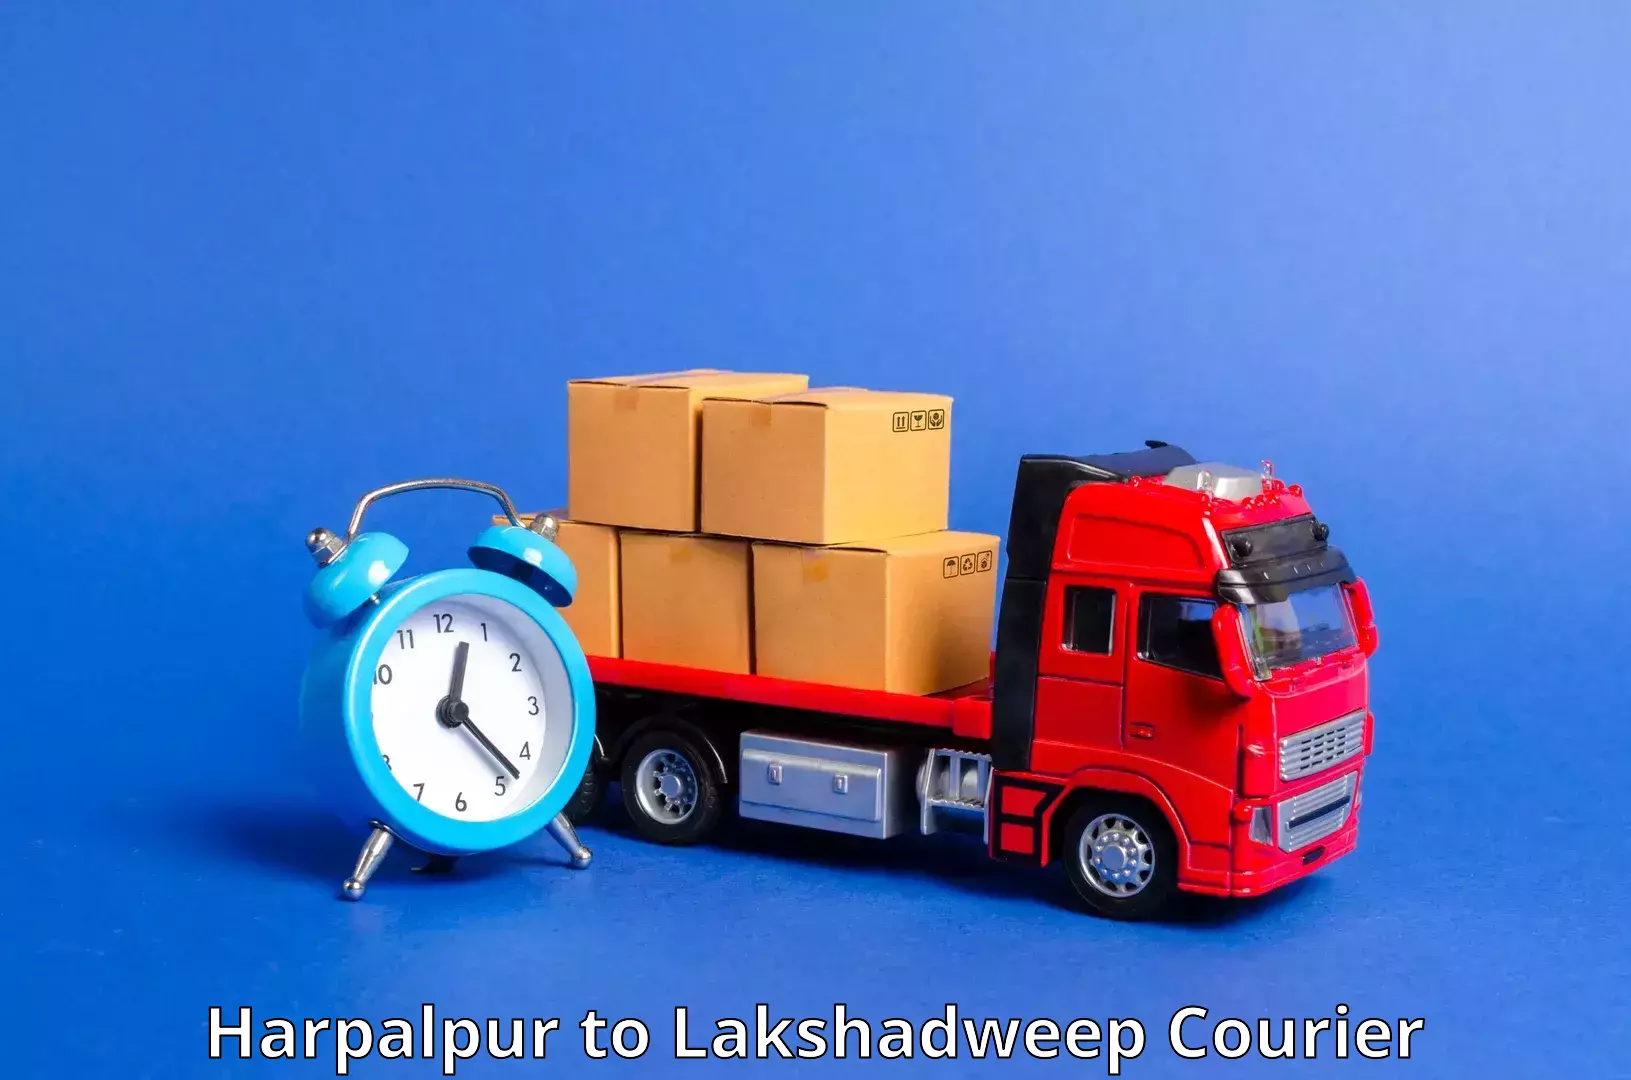 Air courier services Harpalpur to Lakshadweep